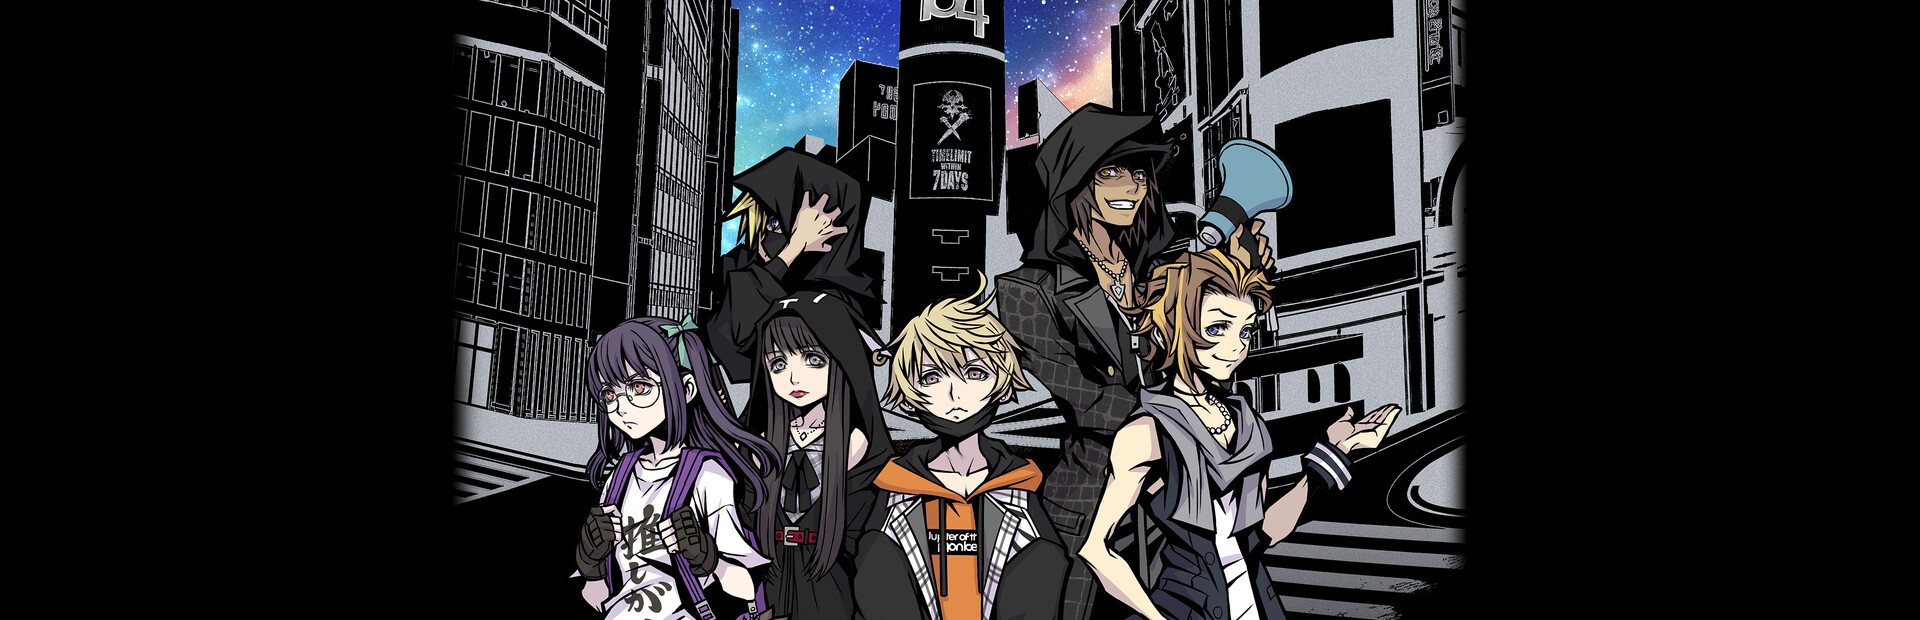 NEO: The World Ends with You cover image